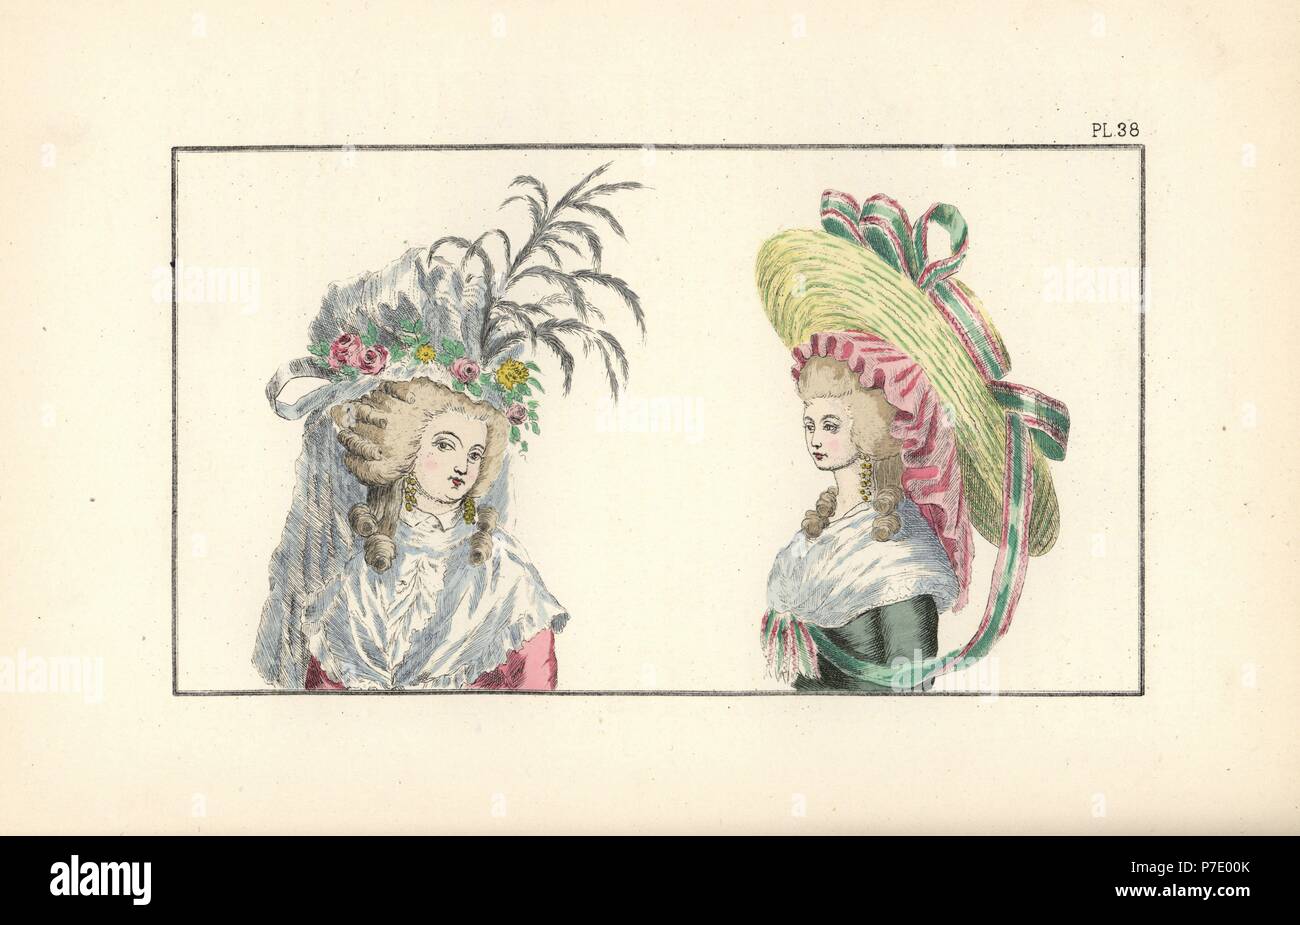 Bonnet a l'Iphigenie, a pouf in white gauze with flowers inspired by the  1779 opera by Gluck, and chapeau a la Colette, straw hat decorated with  ribbons. Handcoloured lithograph from Fashions and